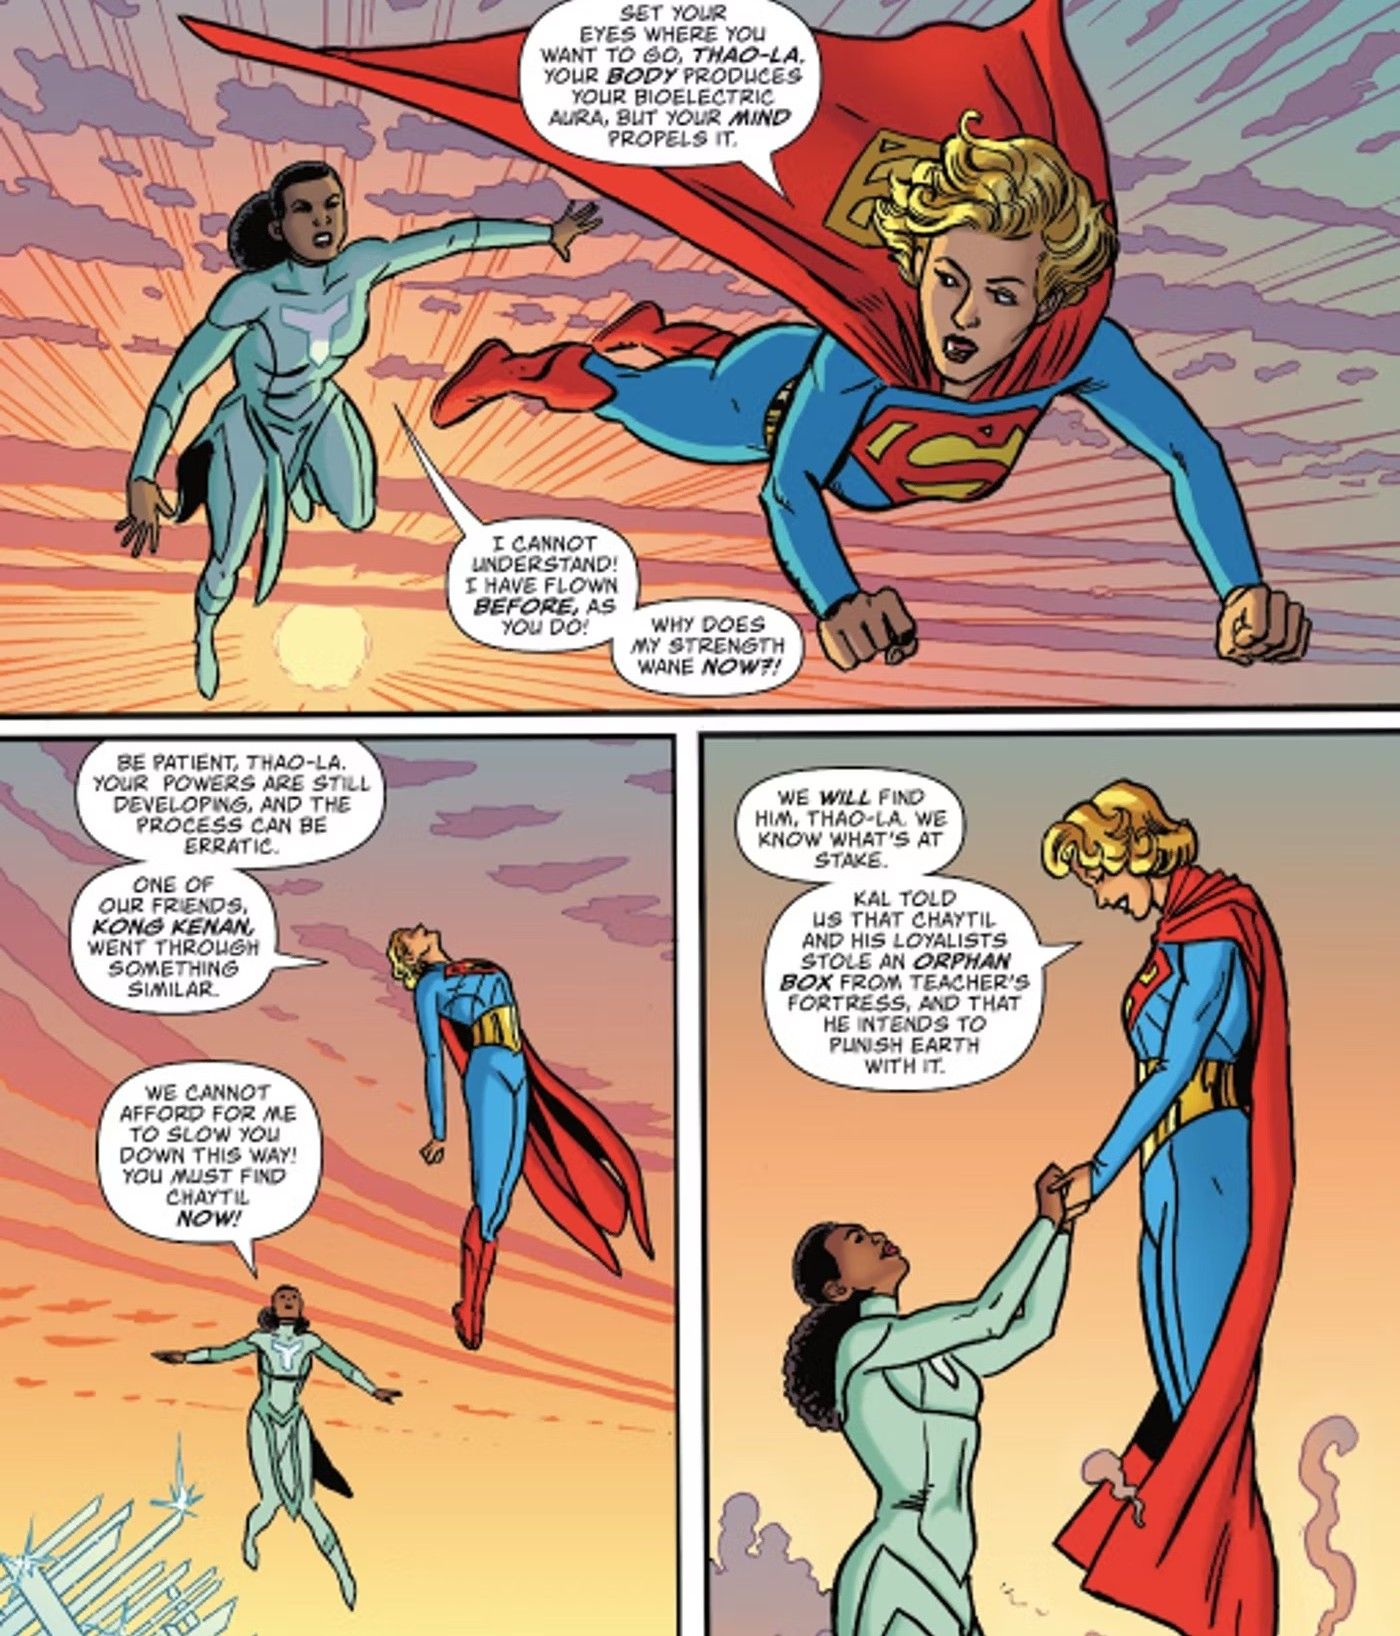 supergirl teaches flying powers